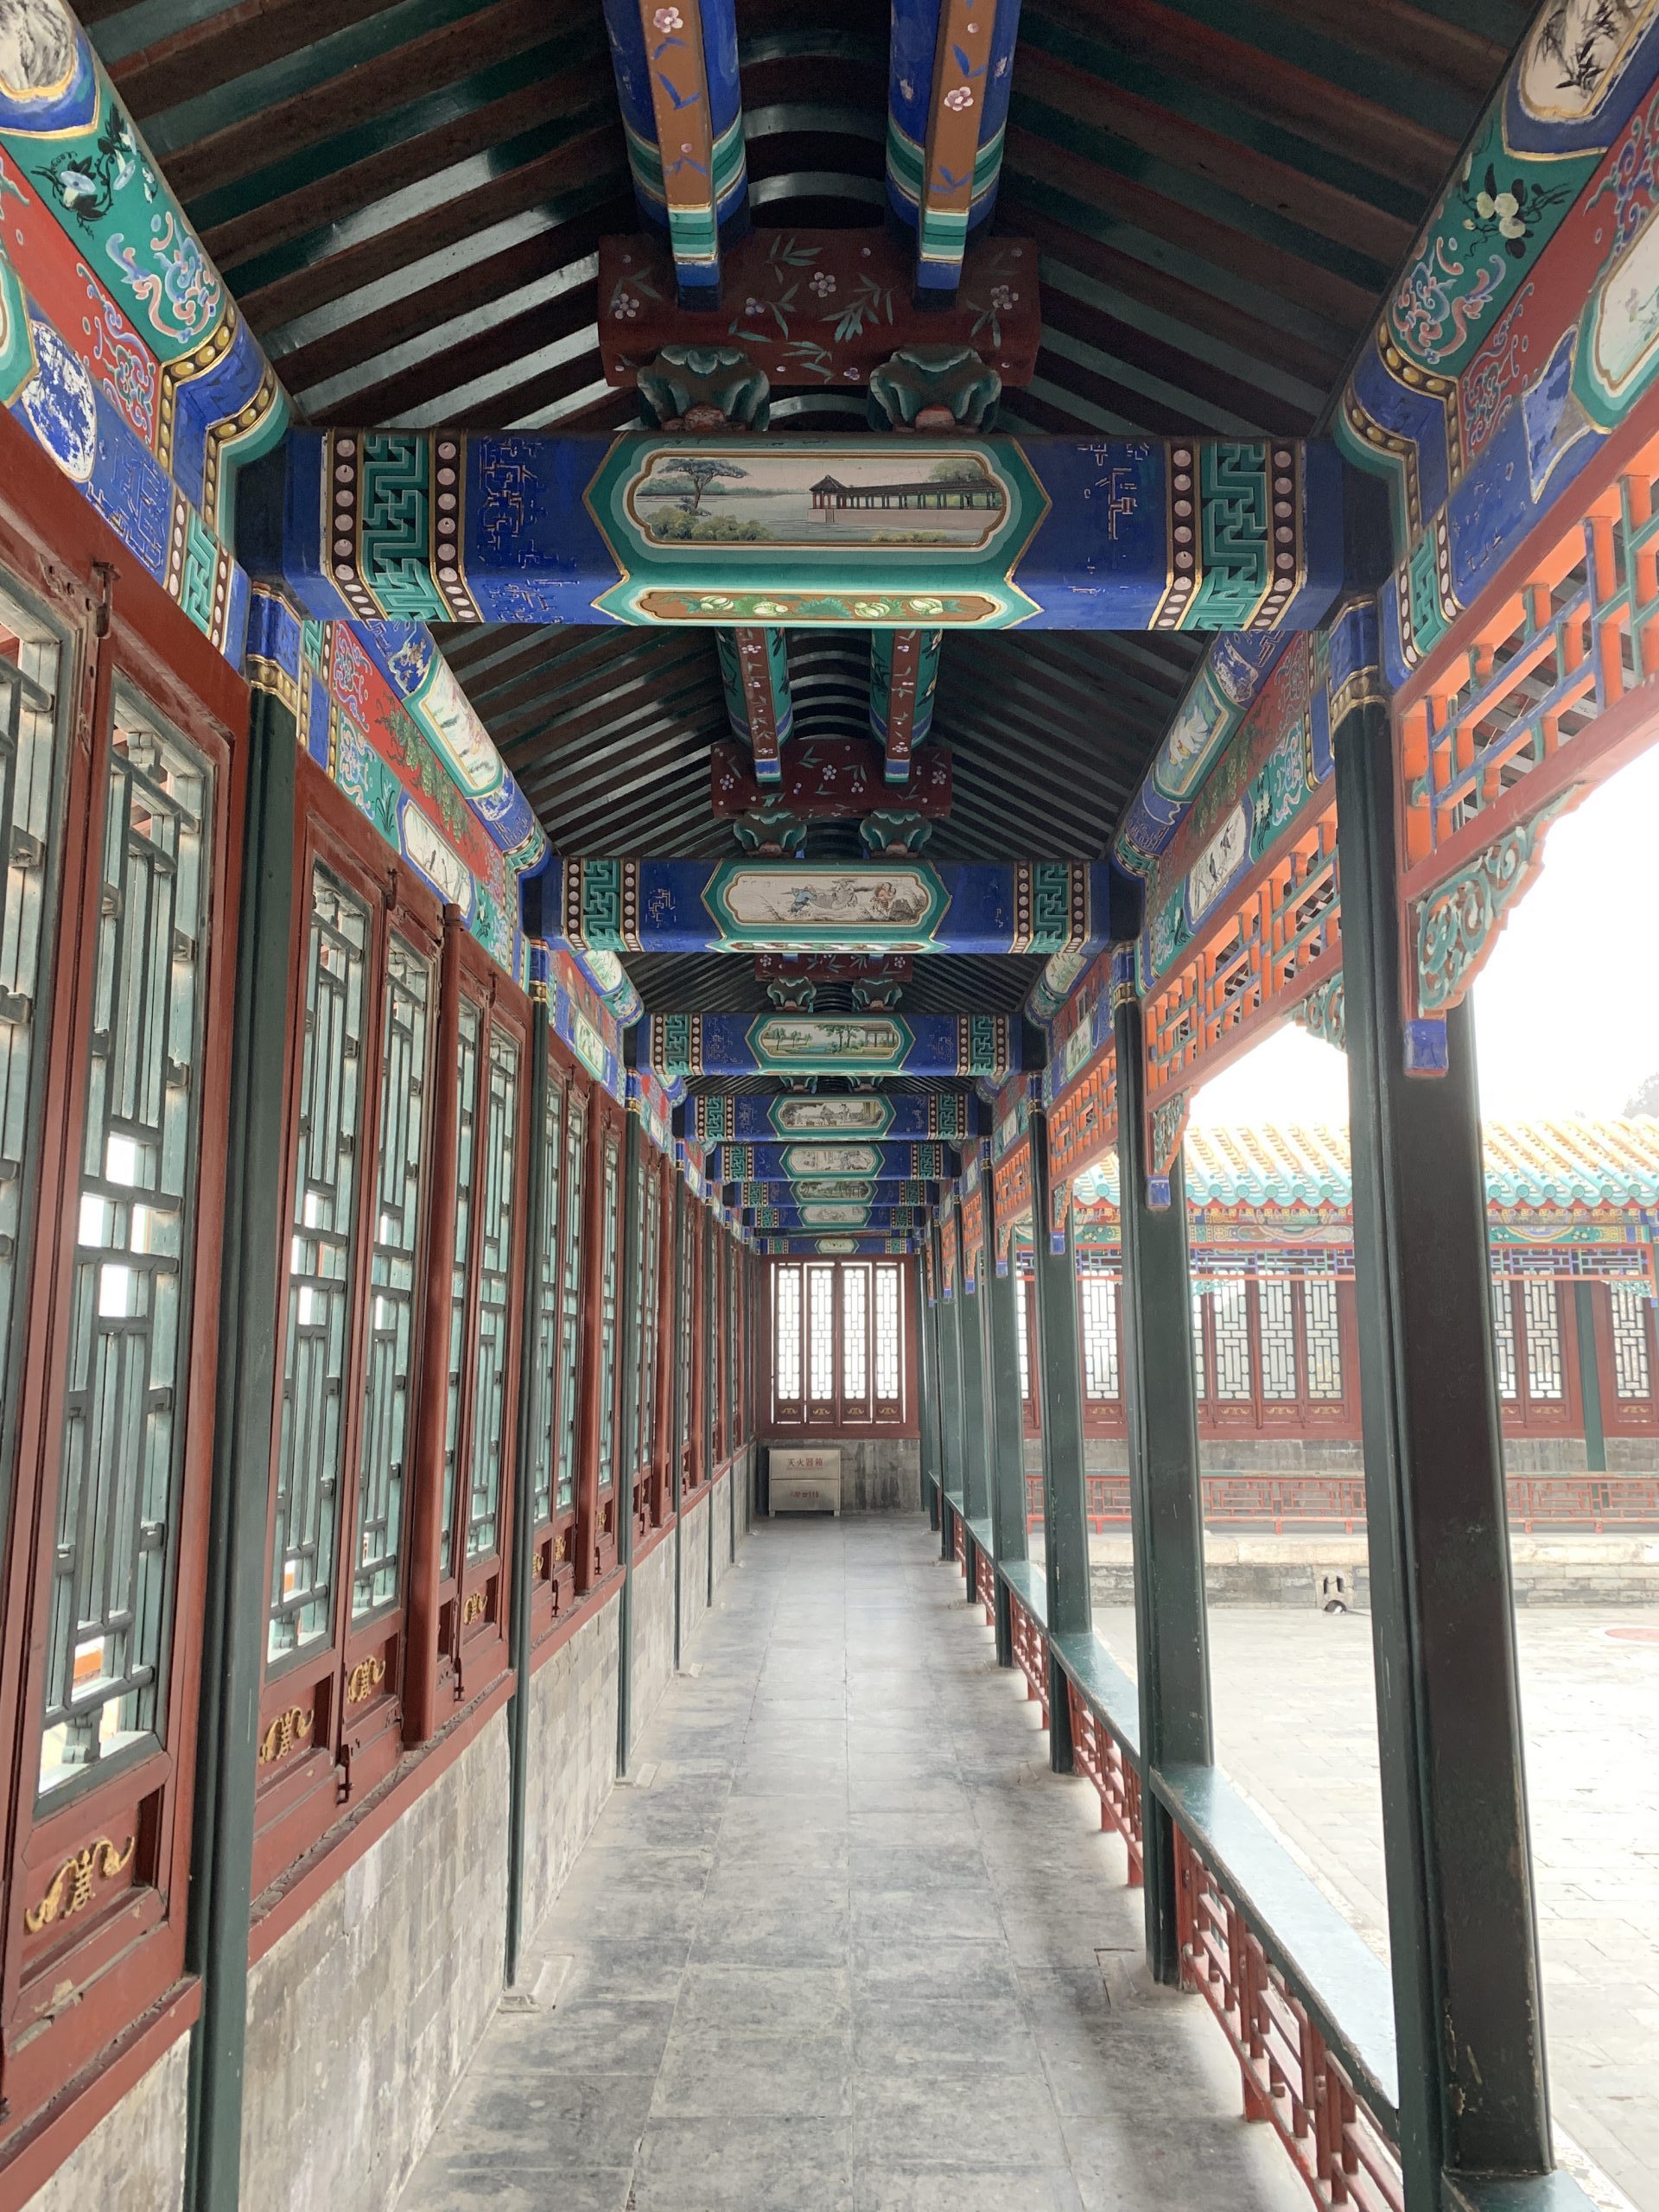 Summer Palace hallway. Extremely detailed work on ceiling and leaded glass on walls